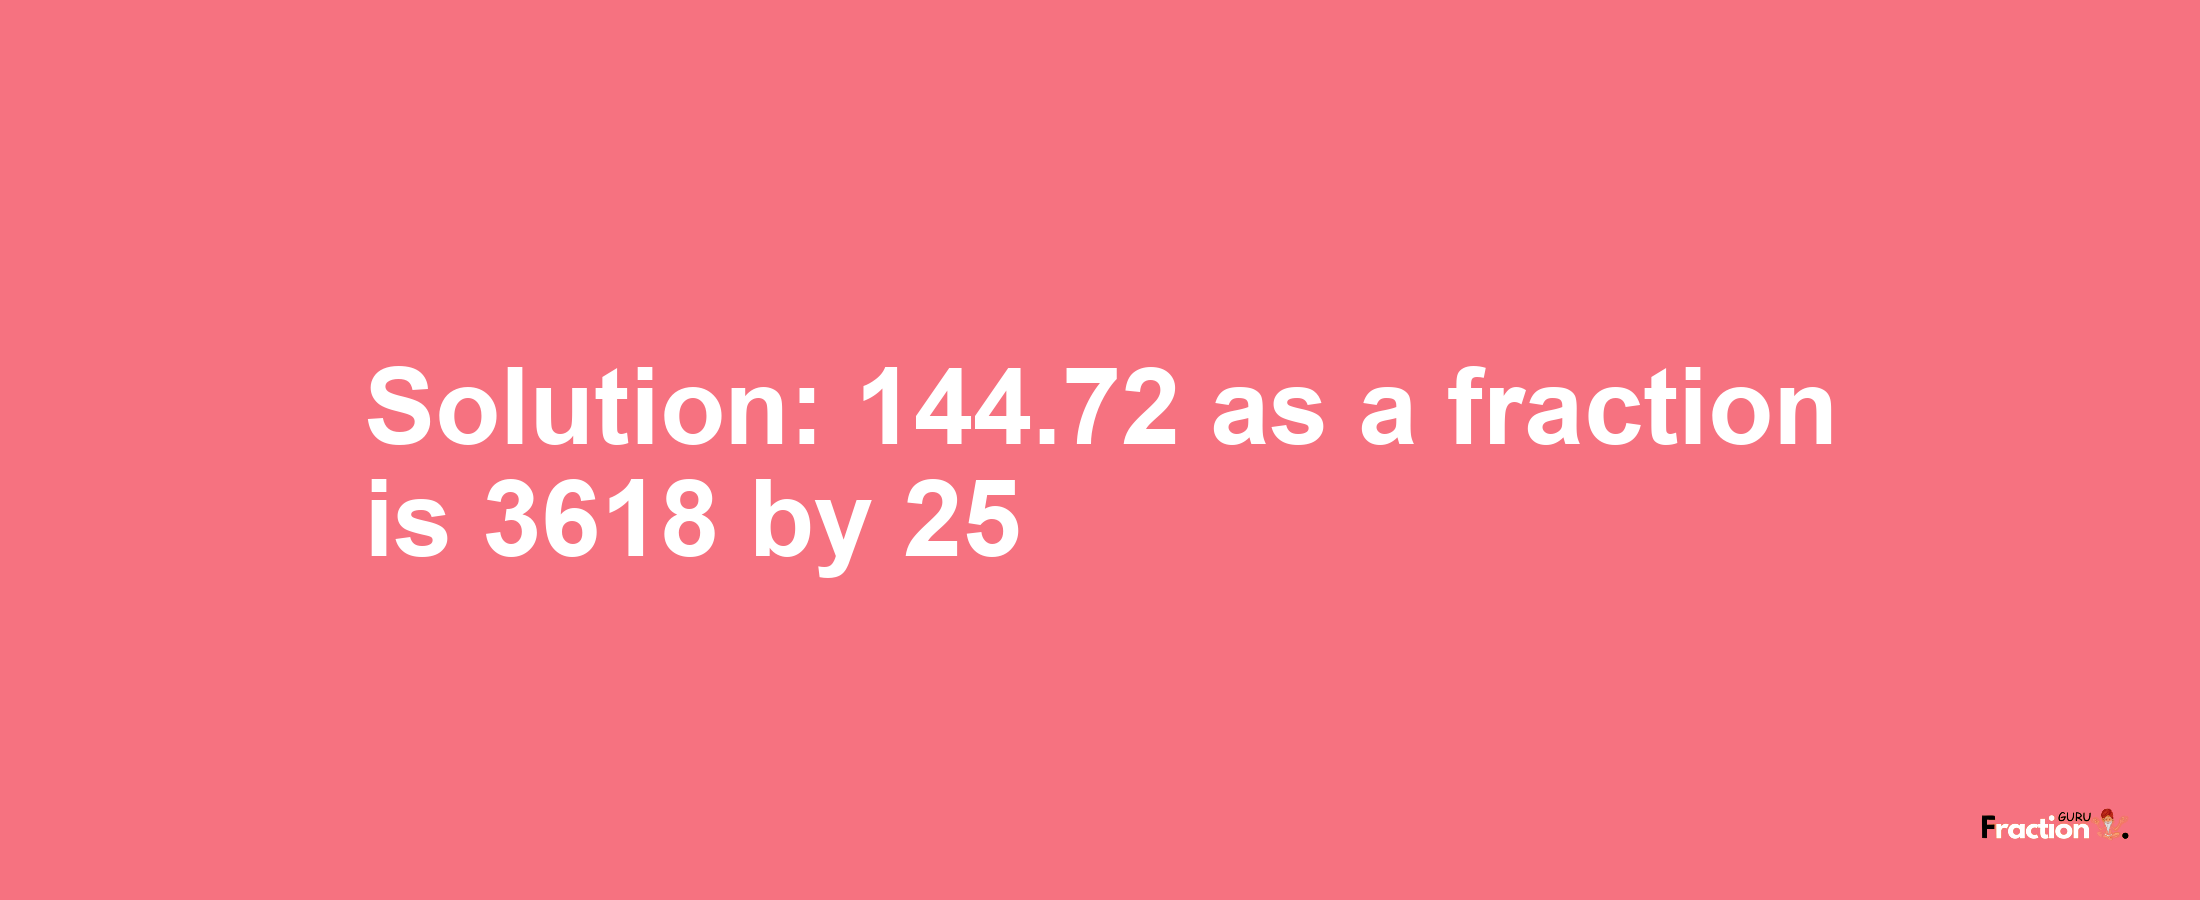 Solution:144.72 as a fraction is 3618/25